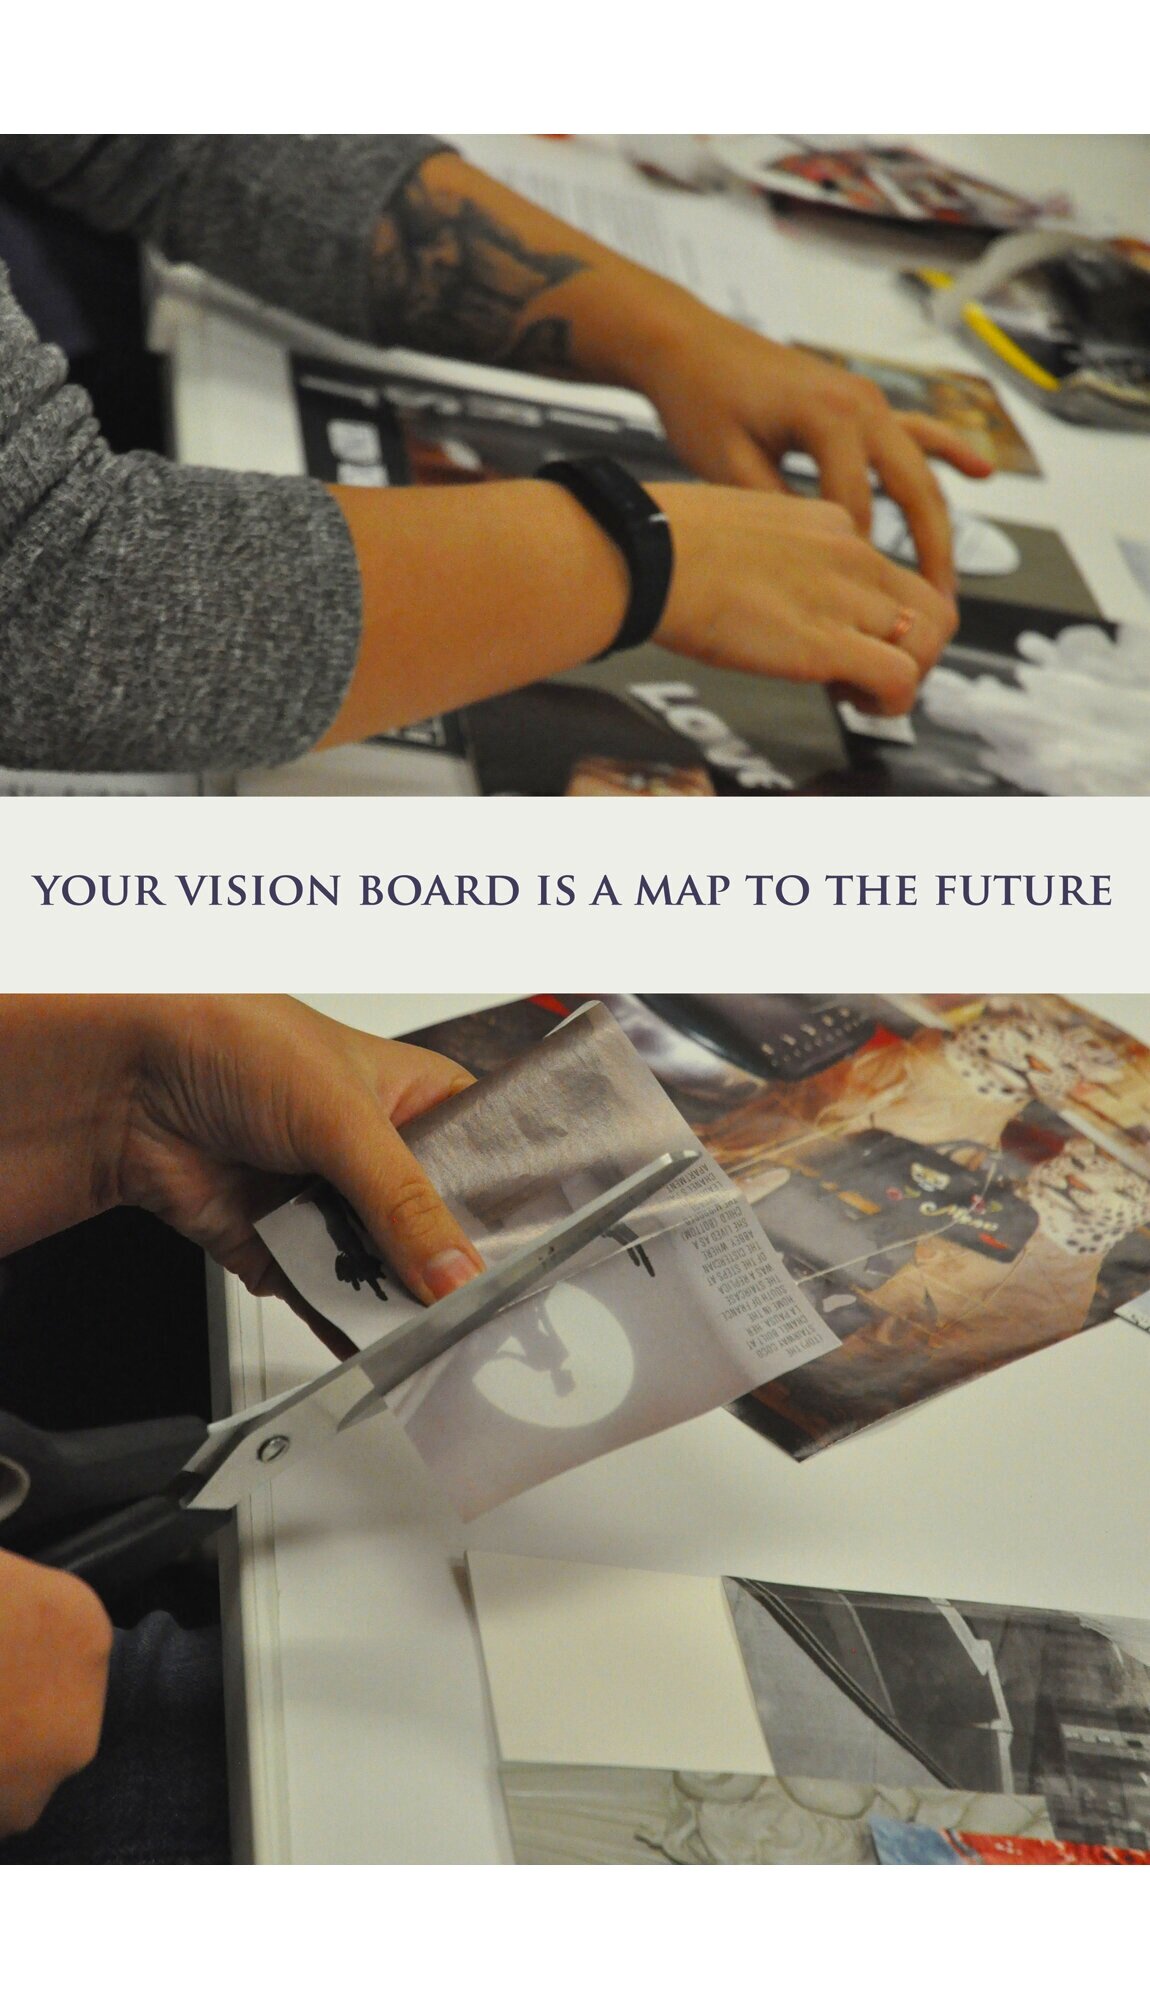 Visionboard_map+to+future.jpg